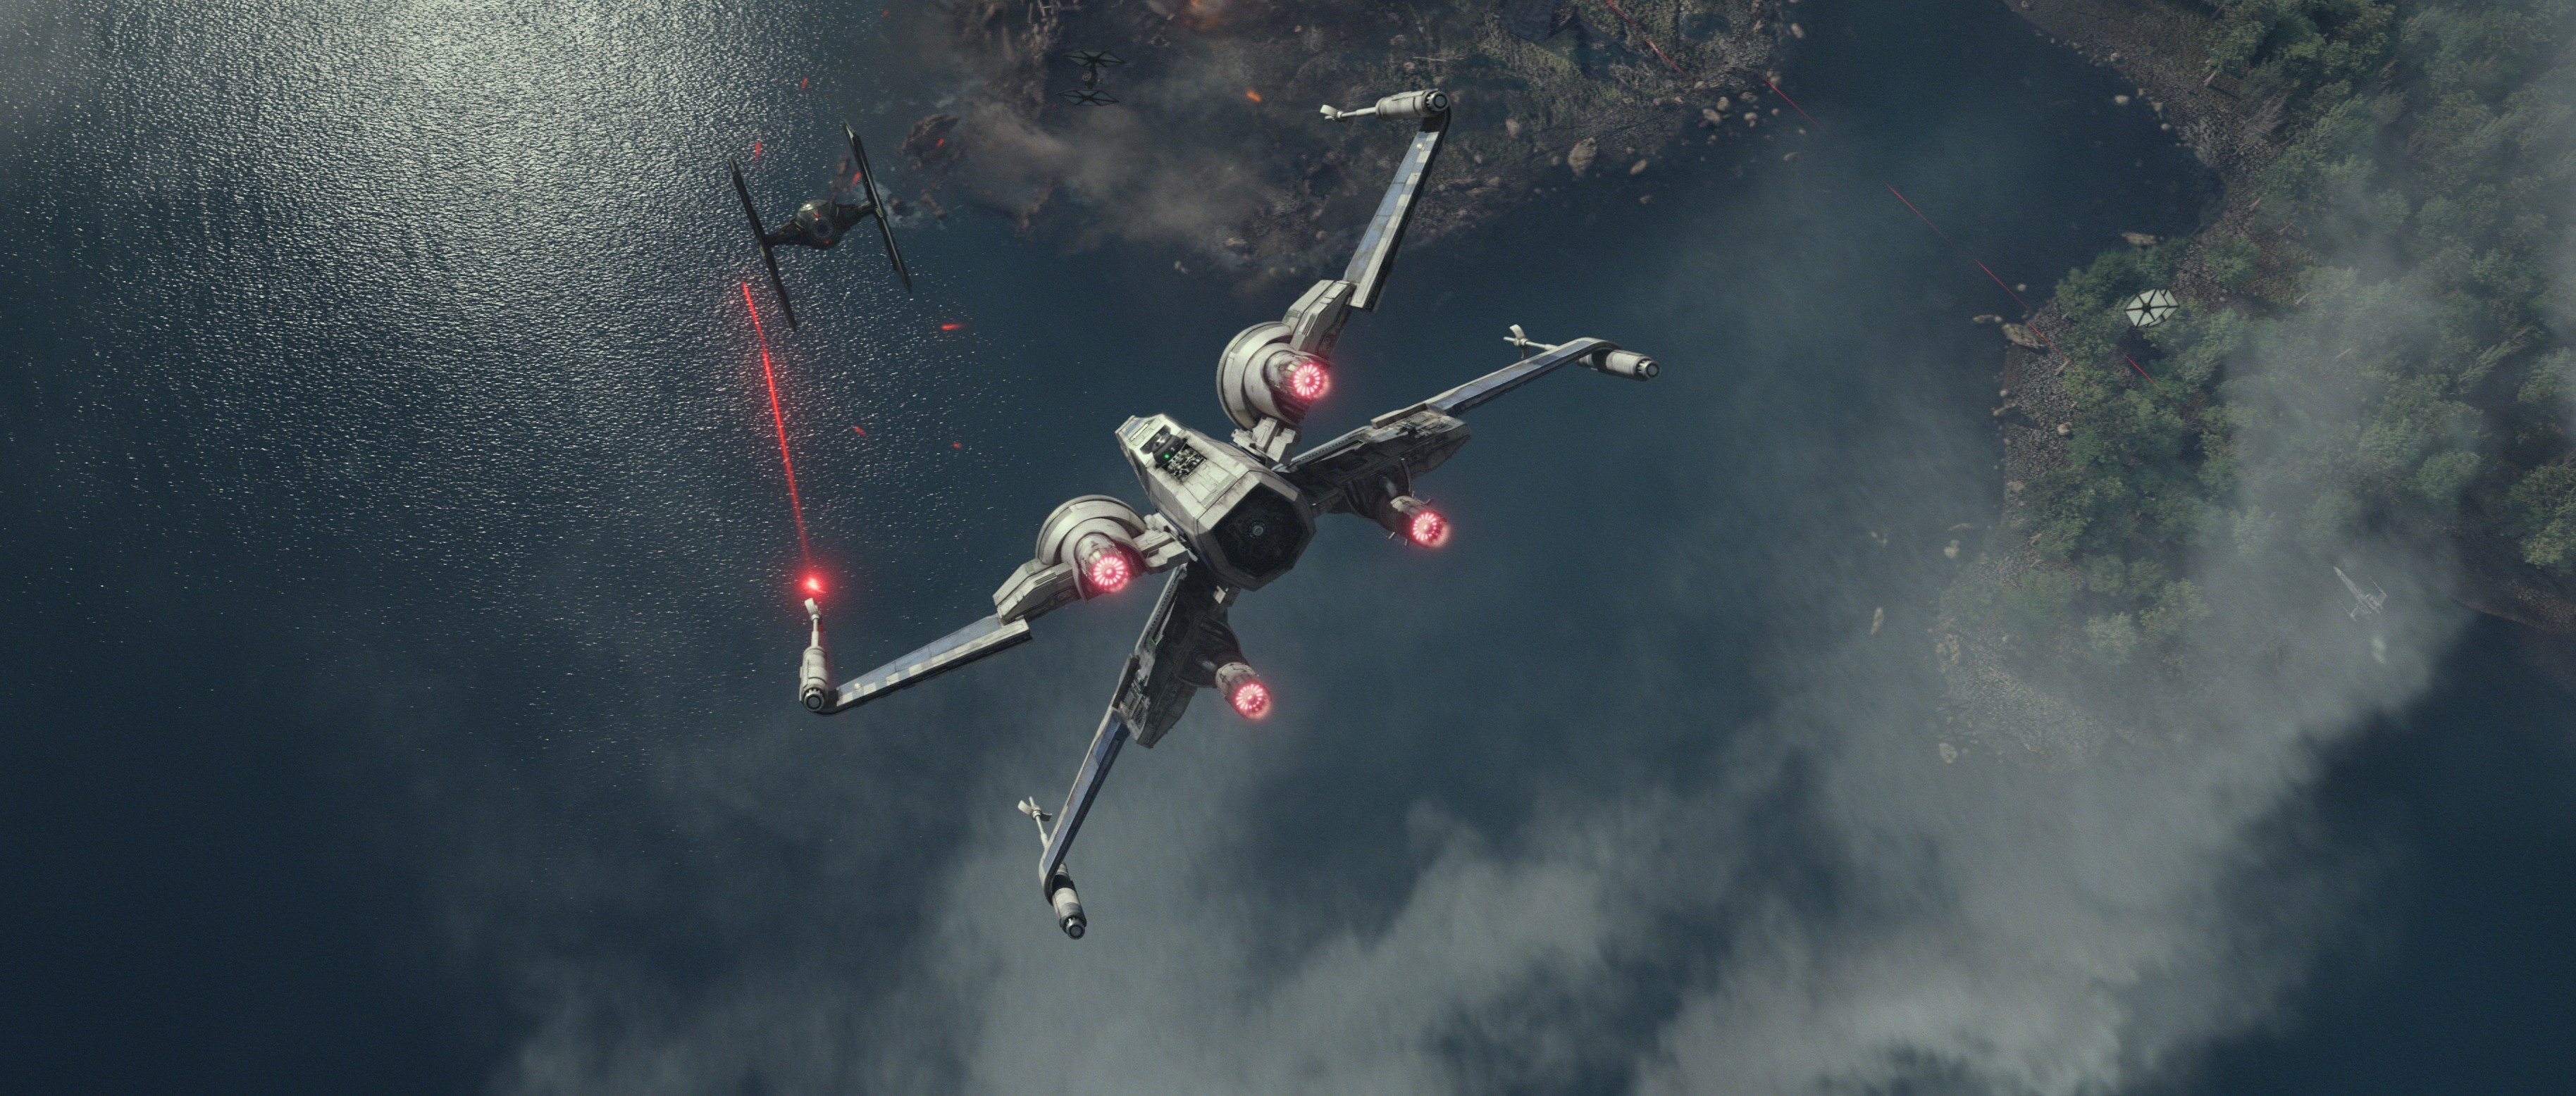 General 3656x1556 Star Wars: The Force Awakens X-wing TIE Fighter movies